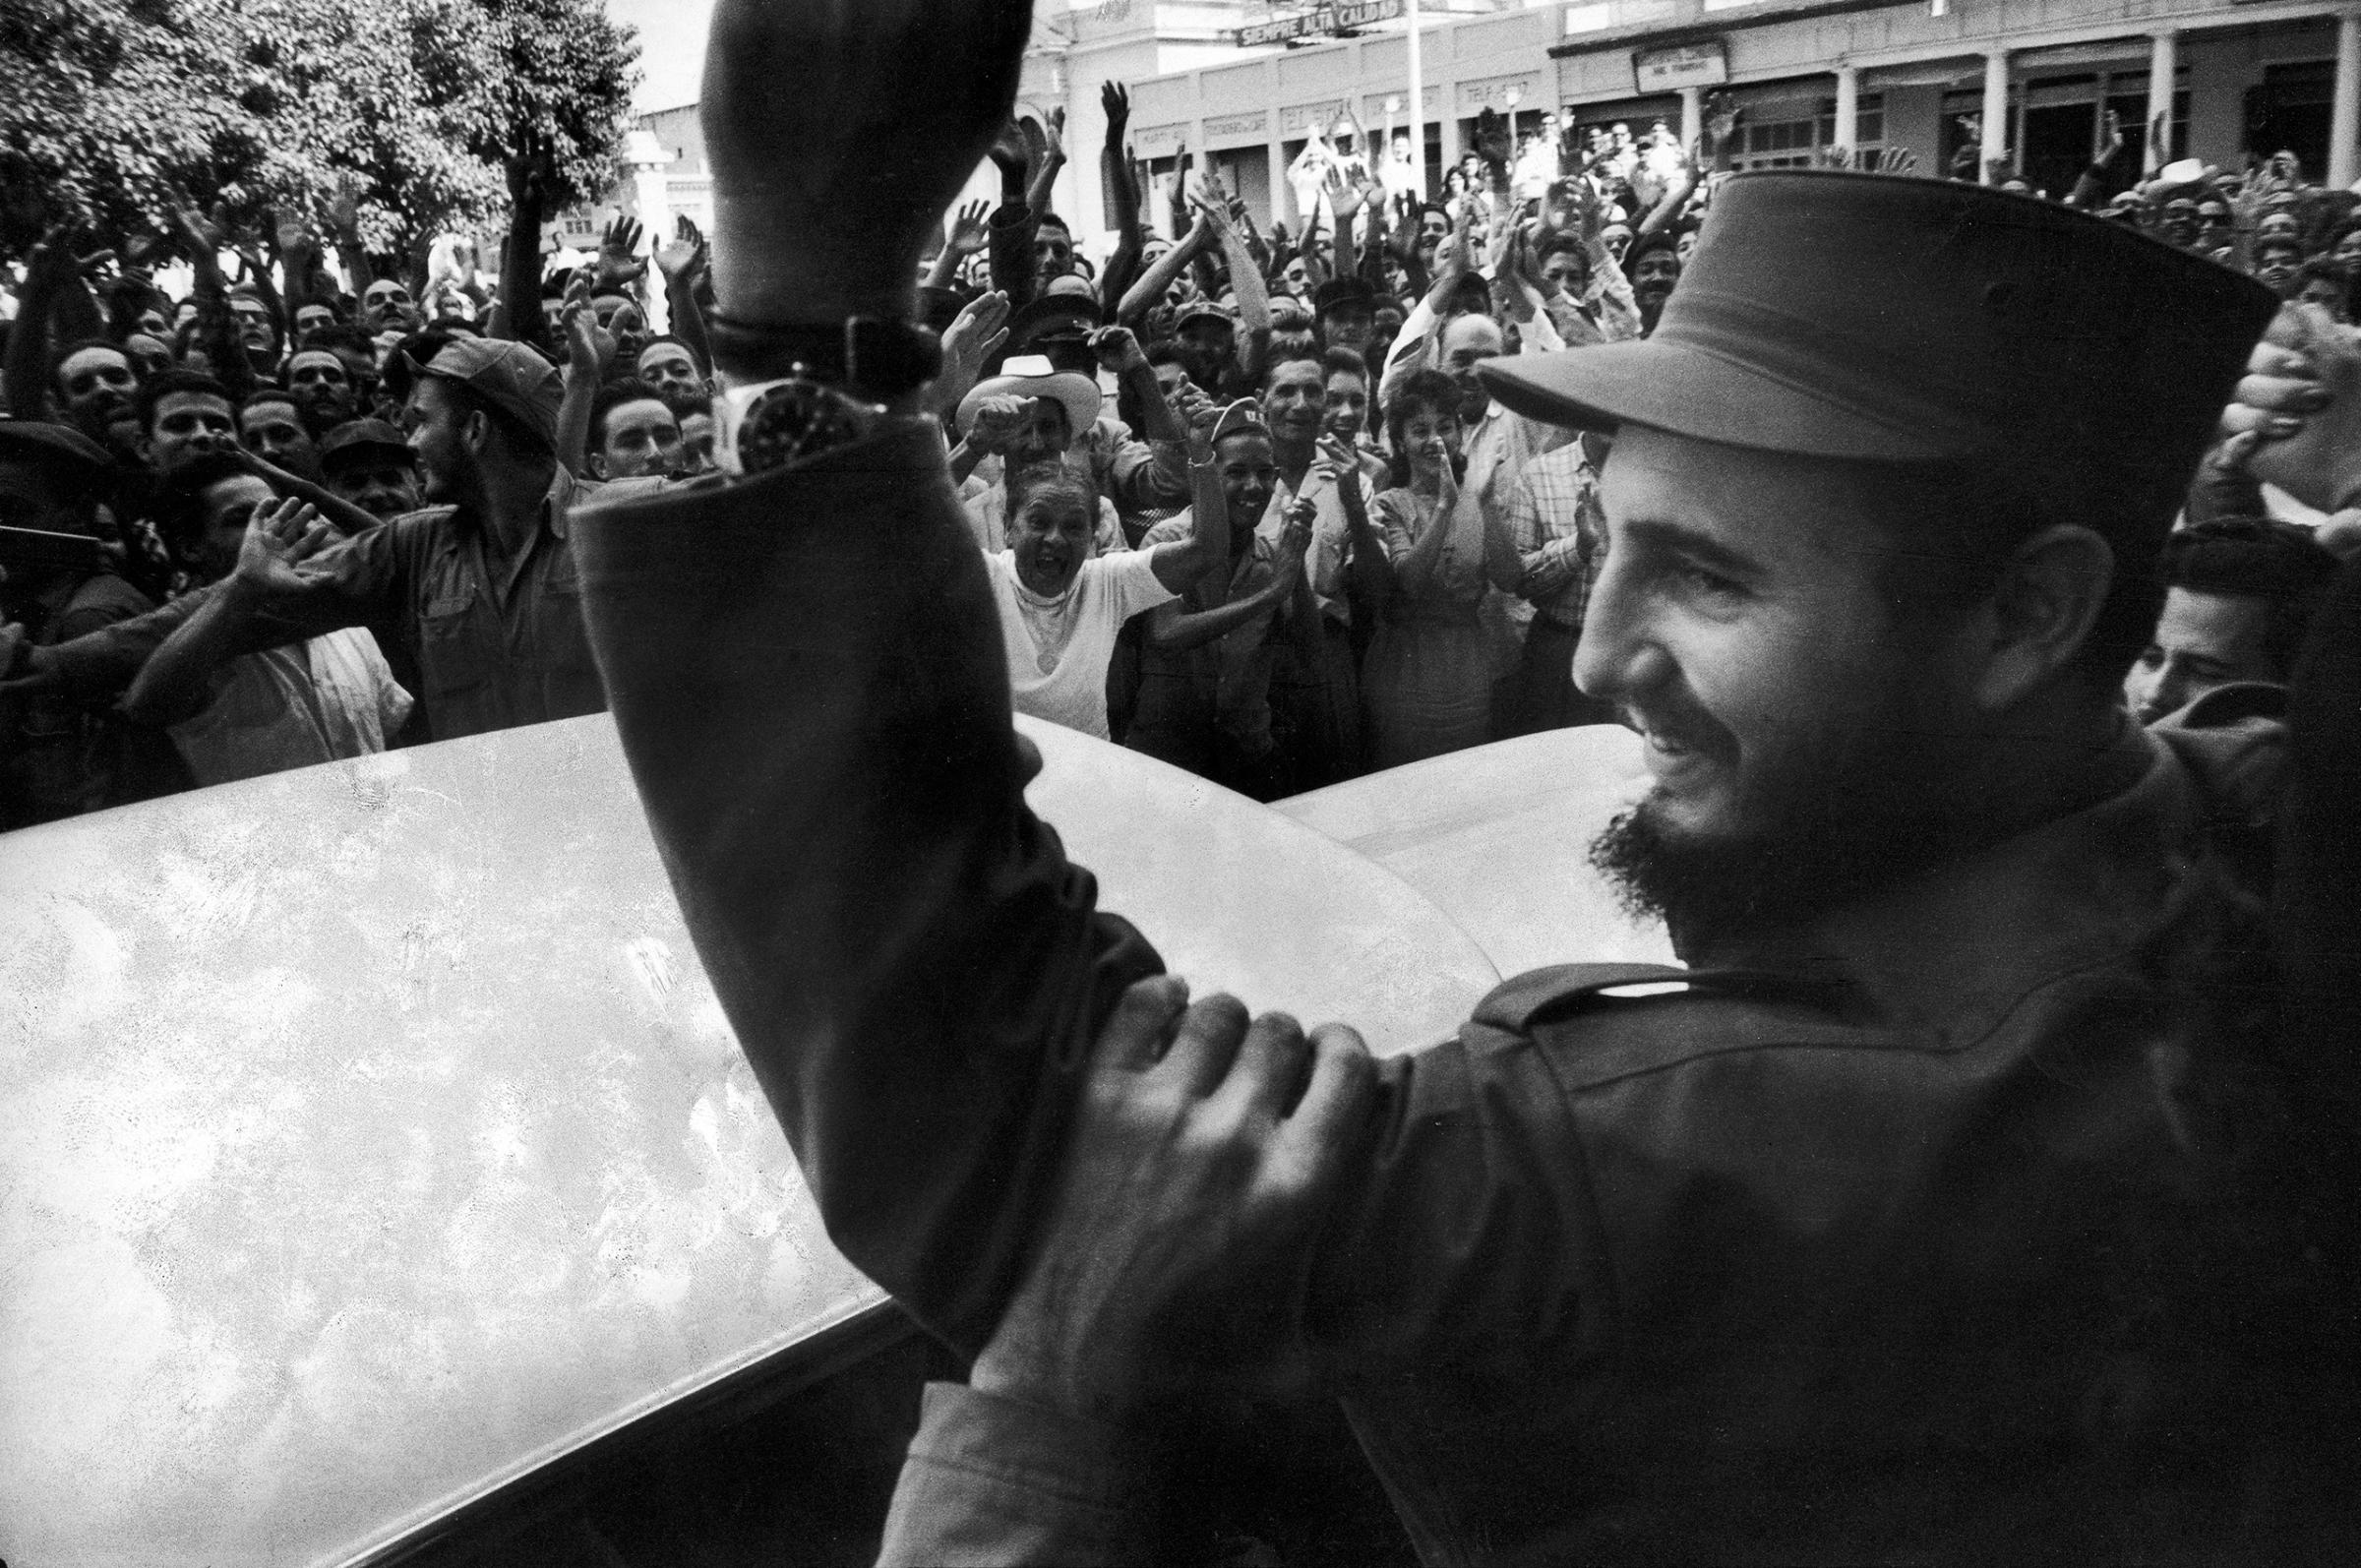 Rebel leader Fidel Castro waves to a cheering crowd on the victorious march to Havana after ousting dictator Fulgencio Batista.